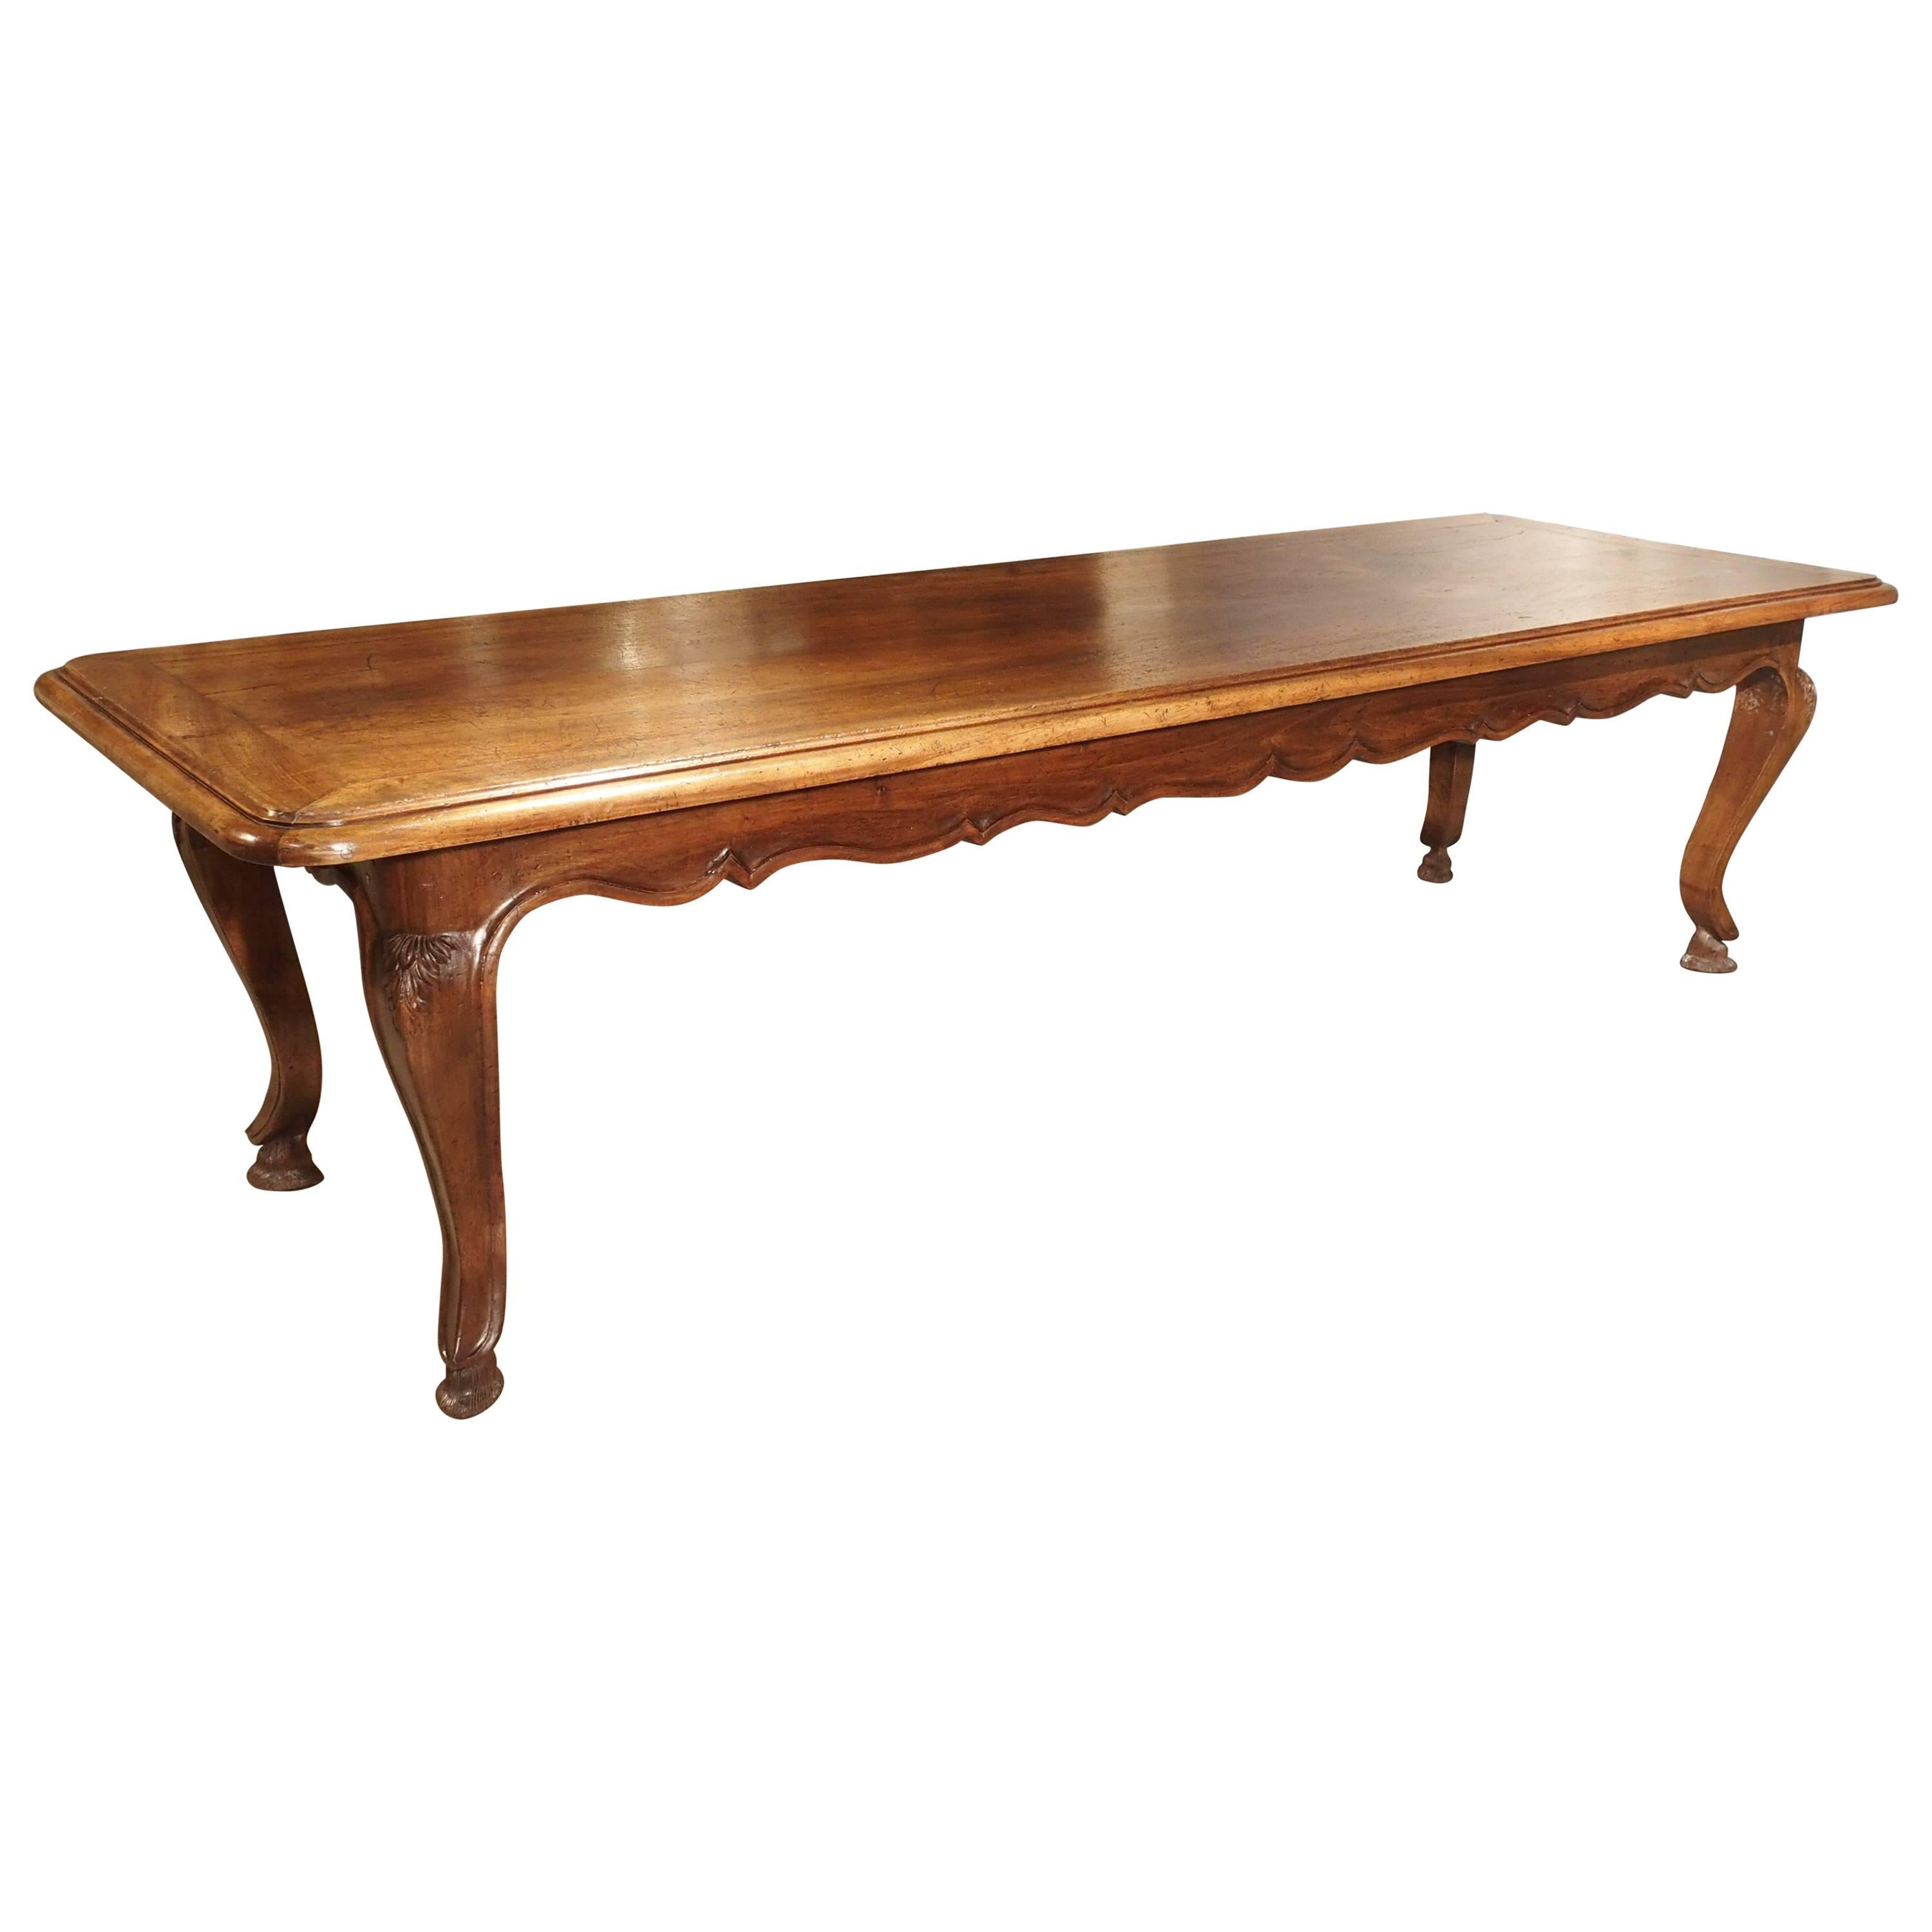 Unusual Antique French Walnut Wood Dining Table, Mid-1800s